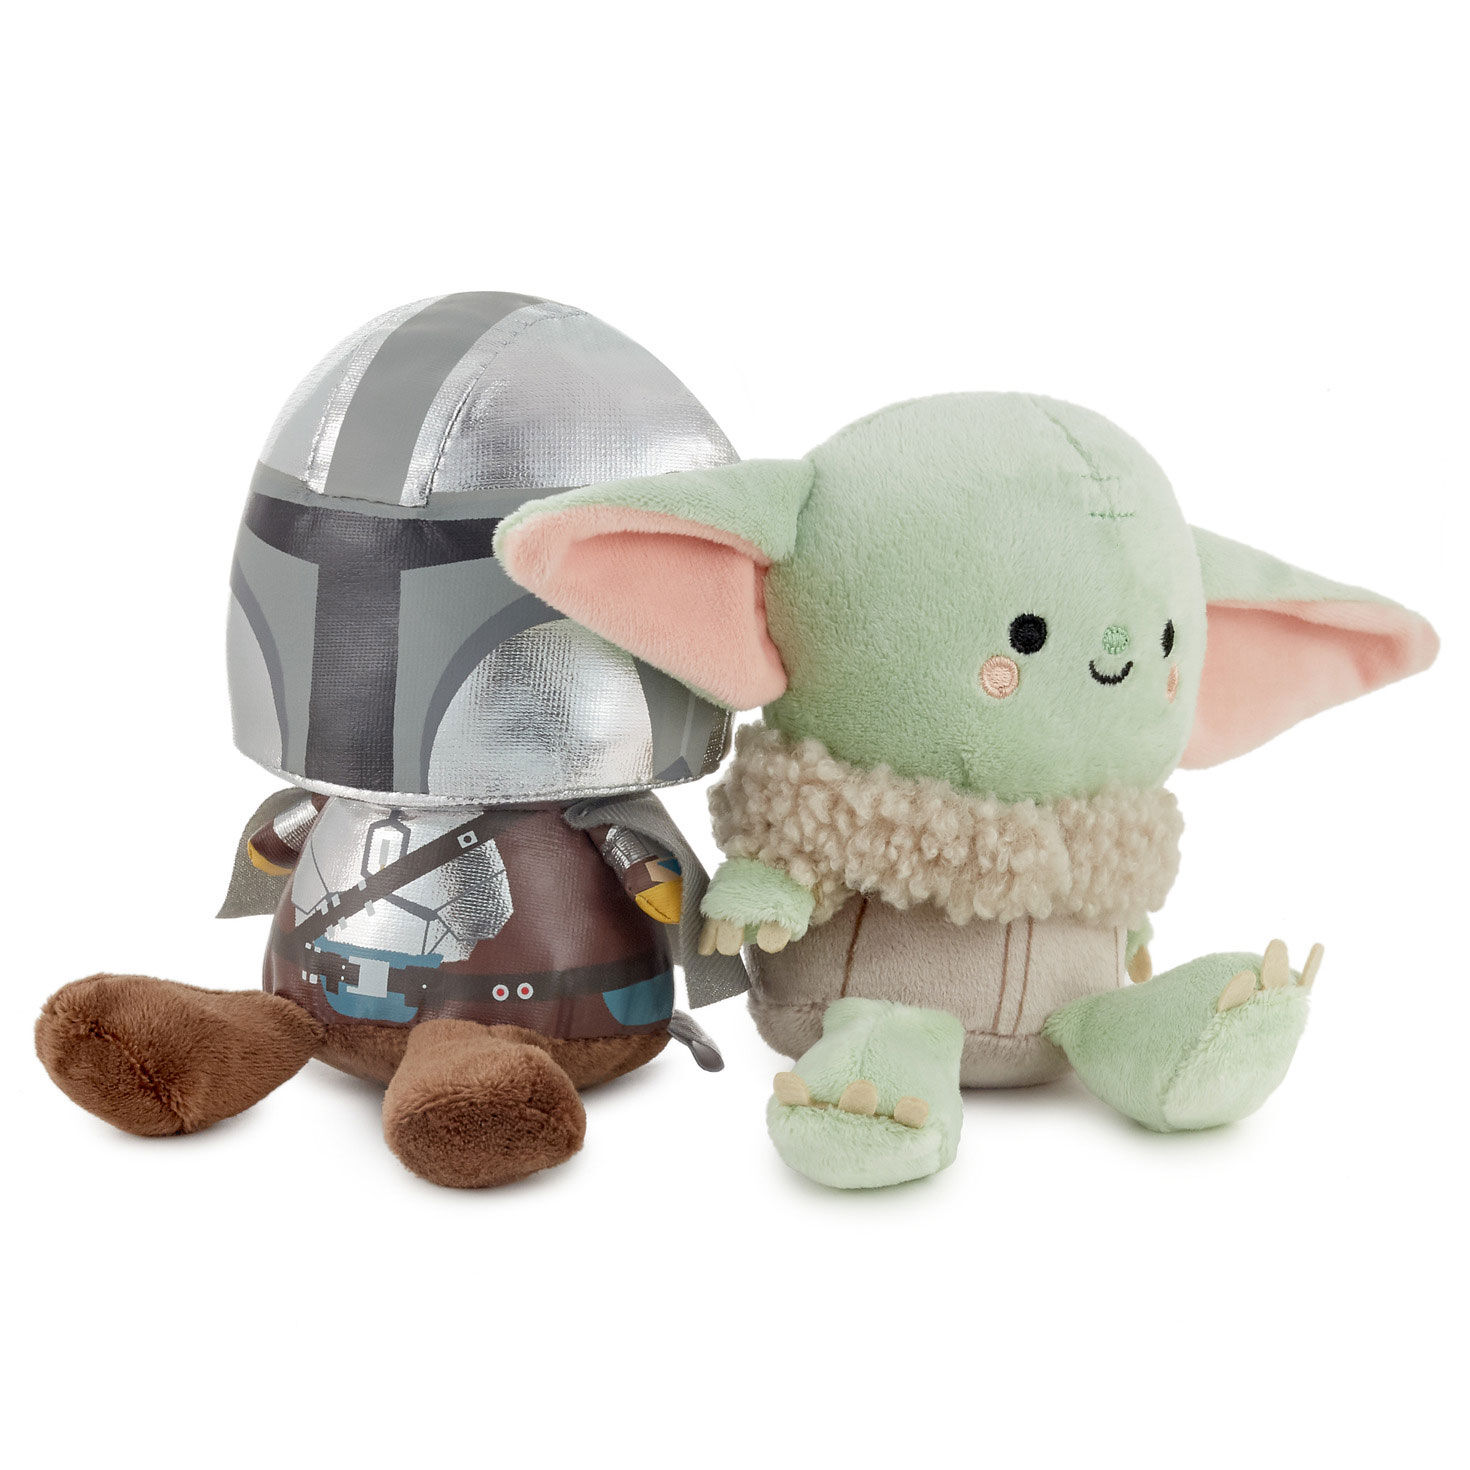 Better Together Star Wars™ The Mandalorian™ and Grogu™ Magnetic Plush, 5" for only USD 22.99 | Hallmark